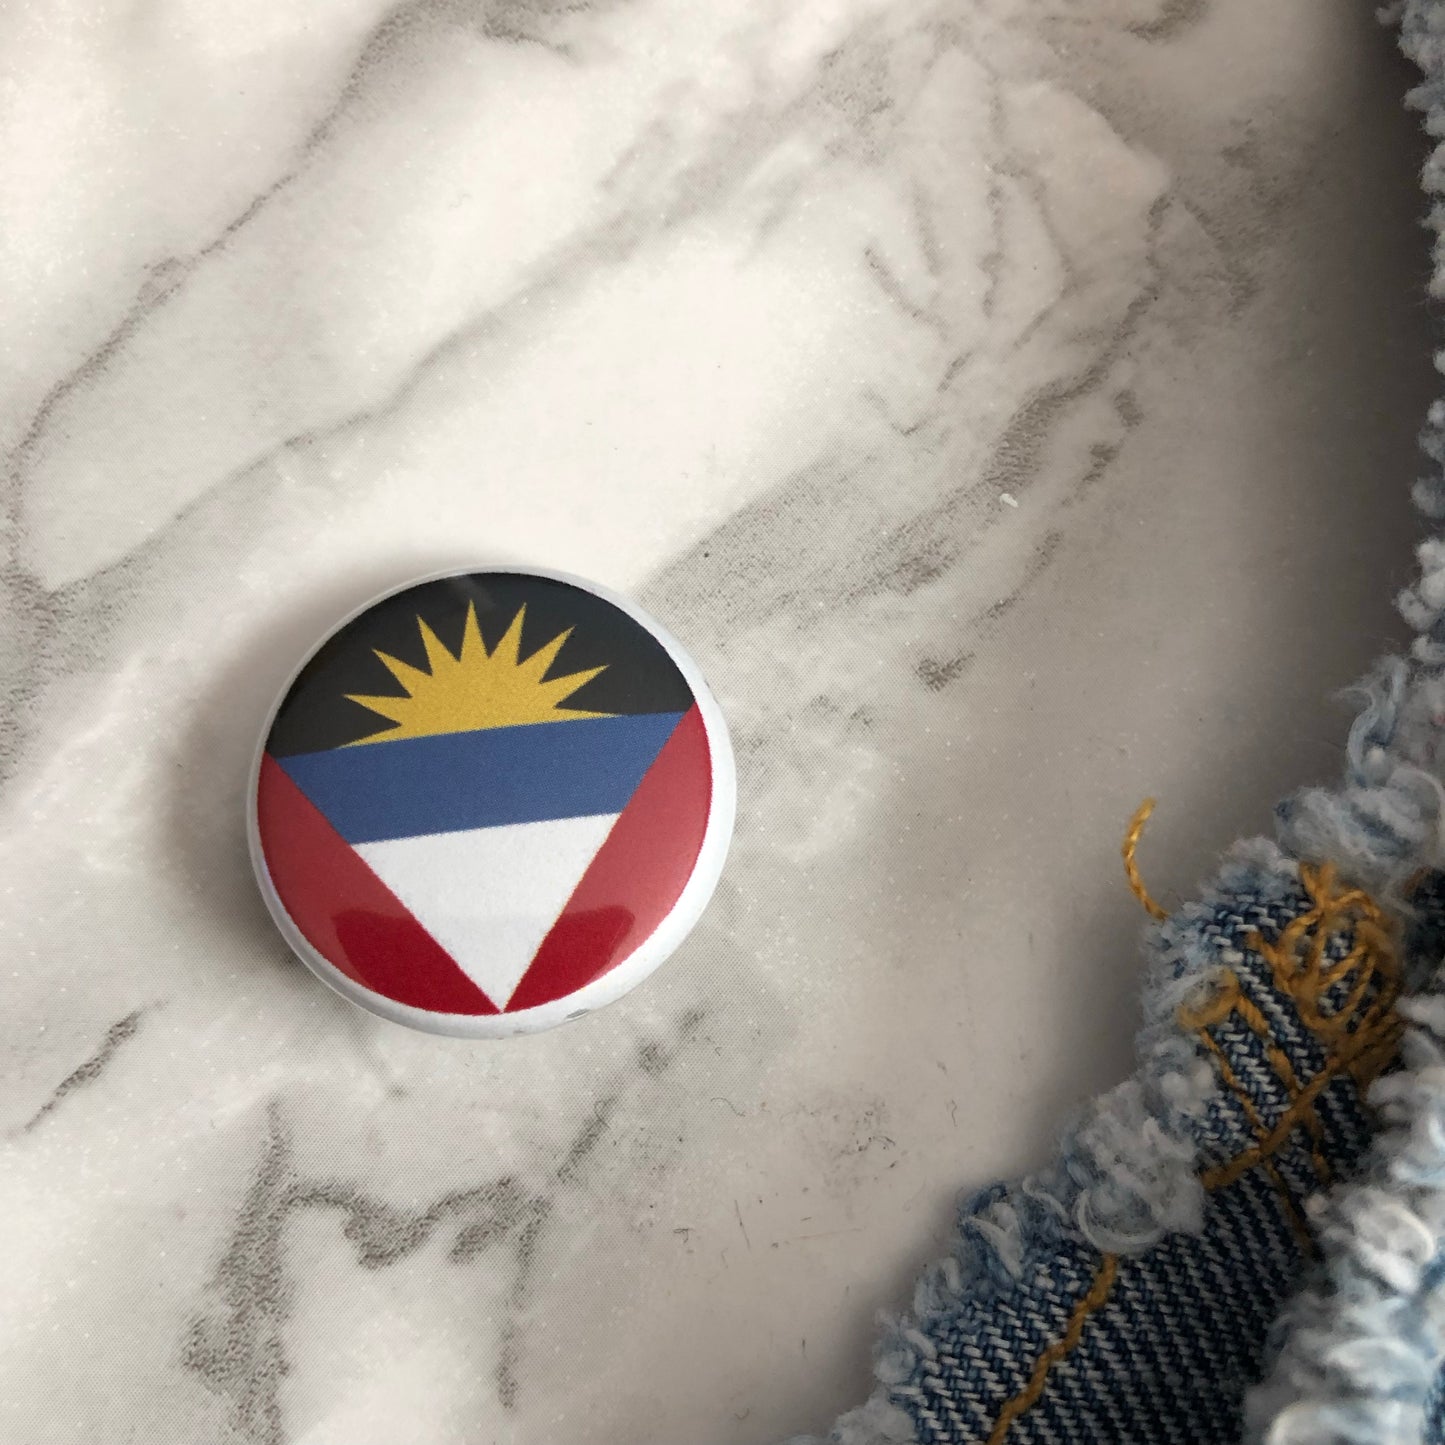 Caribbean Islands West Indies Flags Pin Buttons